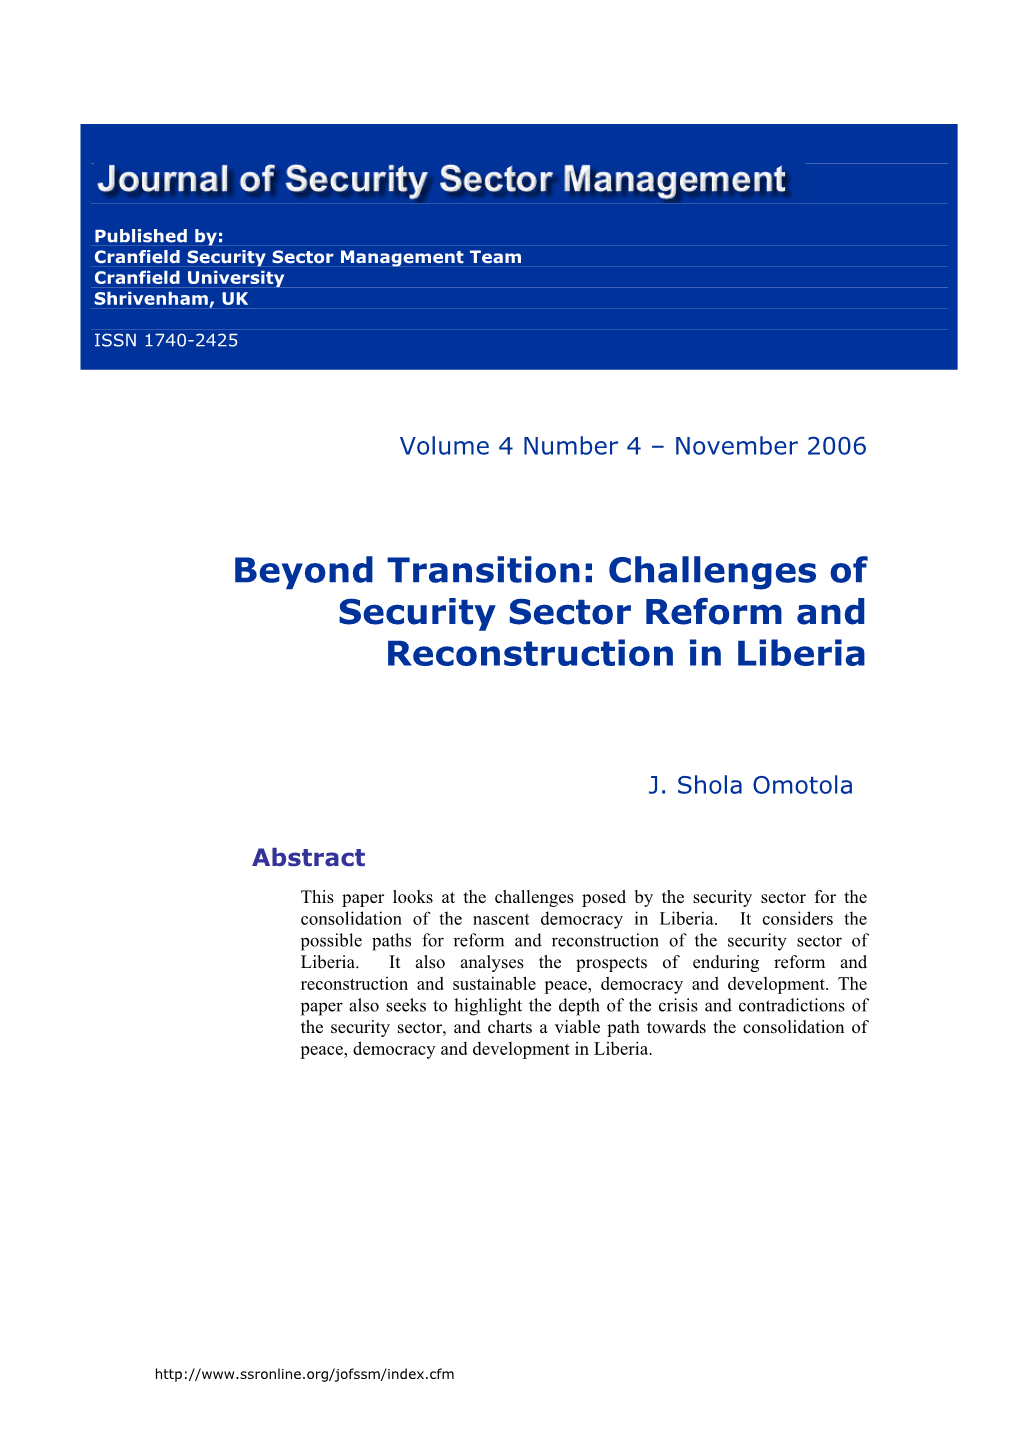 Challenges of Security Sector Reform and Reconstruction in Liberia